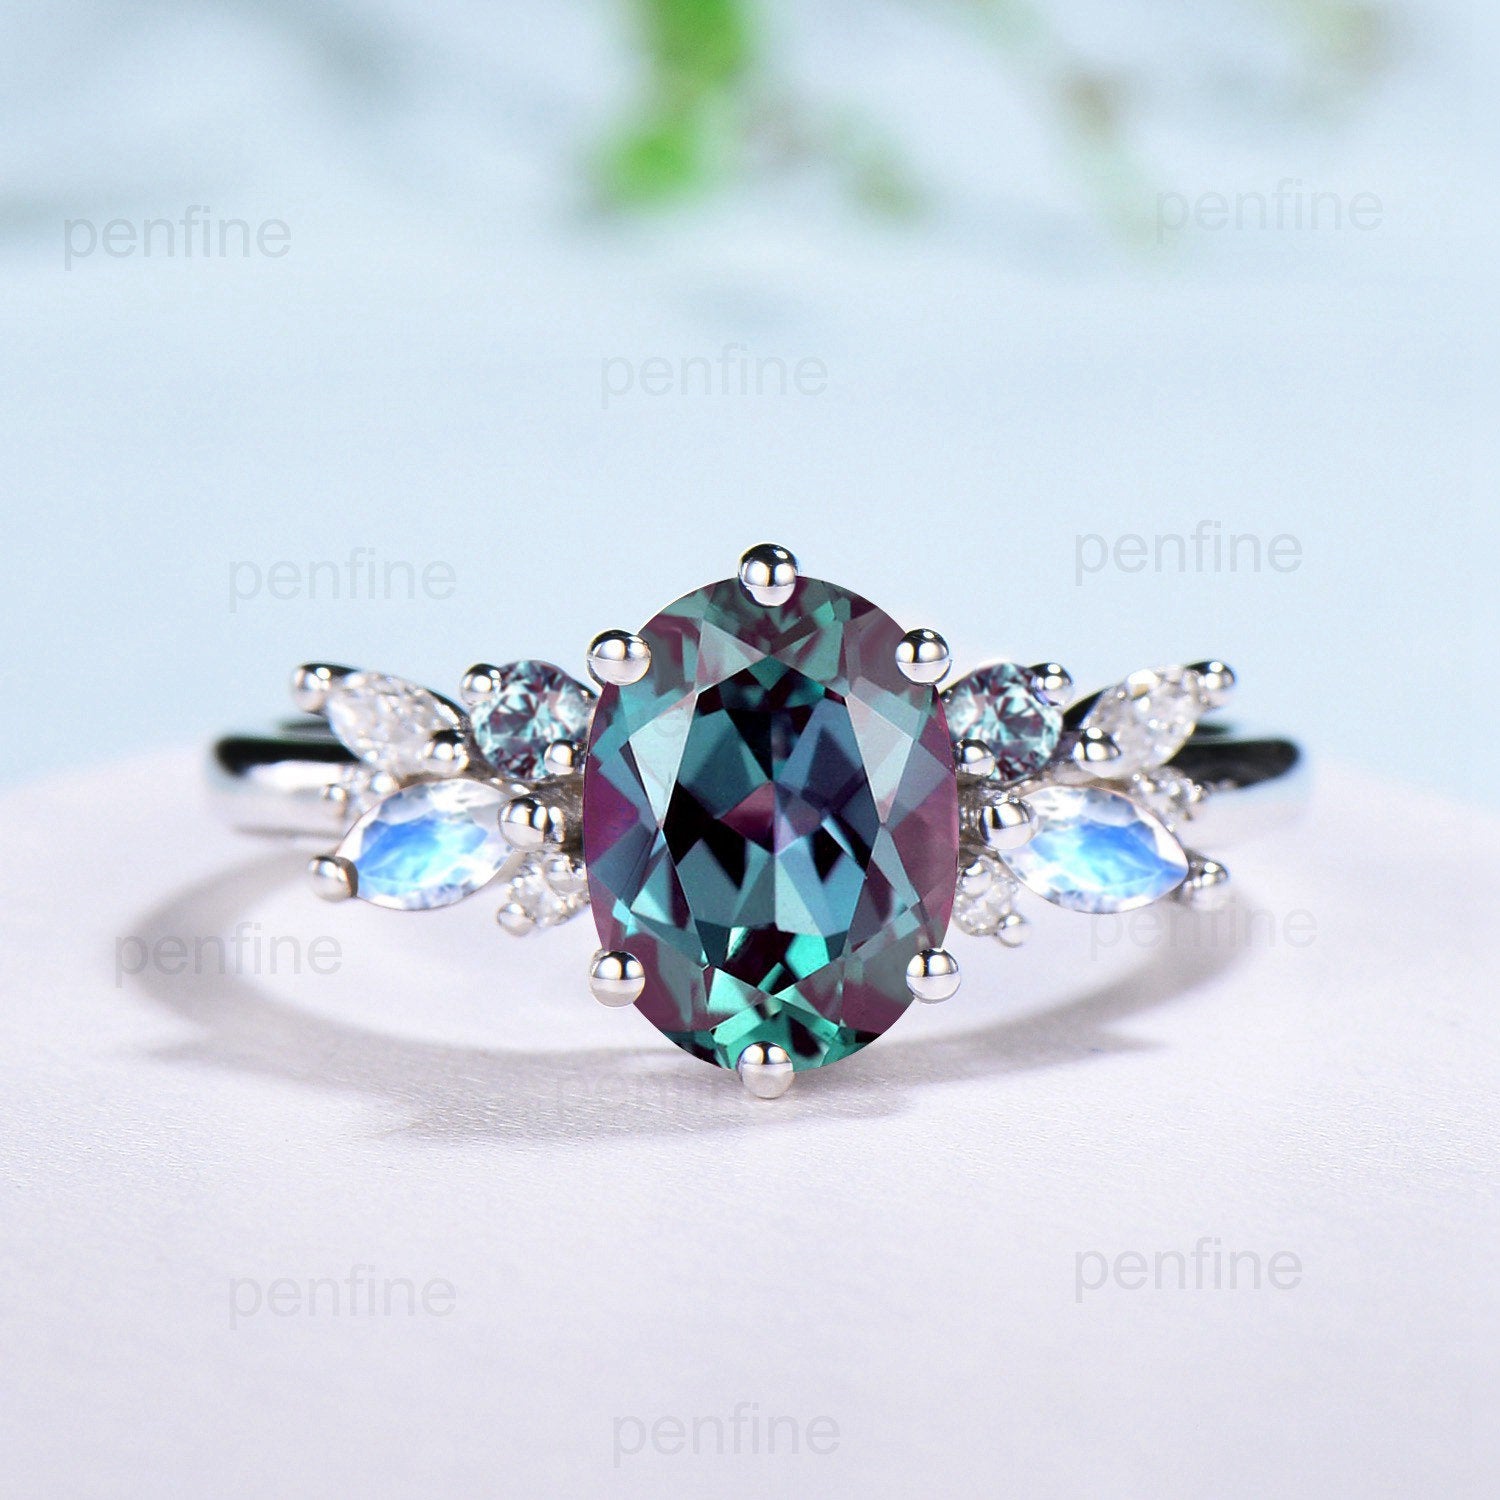 Unique Alexandrite Engagement Ring Set Cluster Marquise Moonstone Wedding Ring Vintage Curved Moissanite White Opal Bridal Ring Set For Her - PENFINE